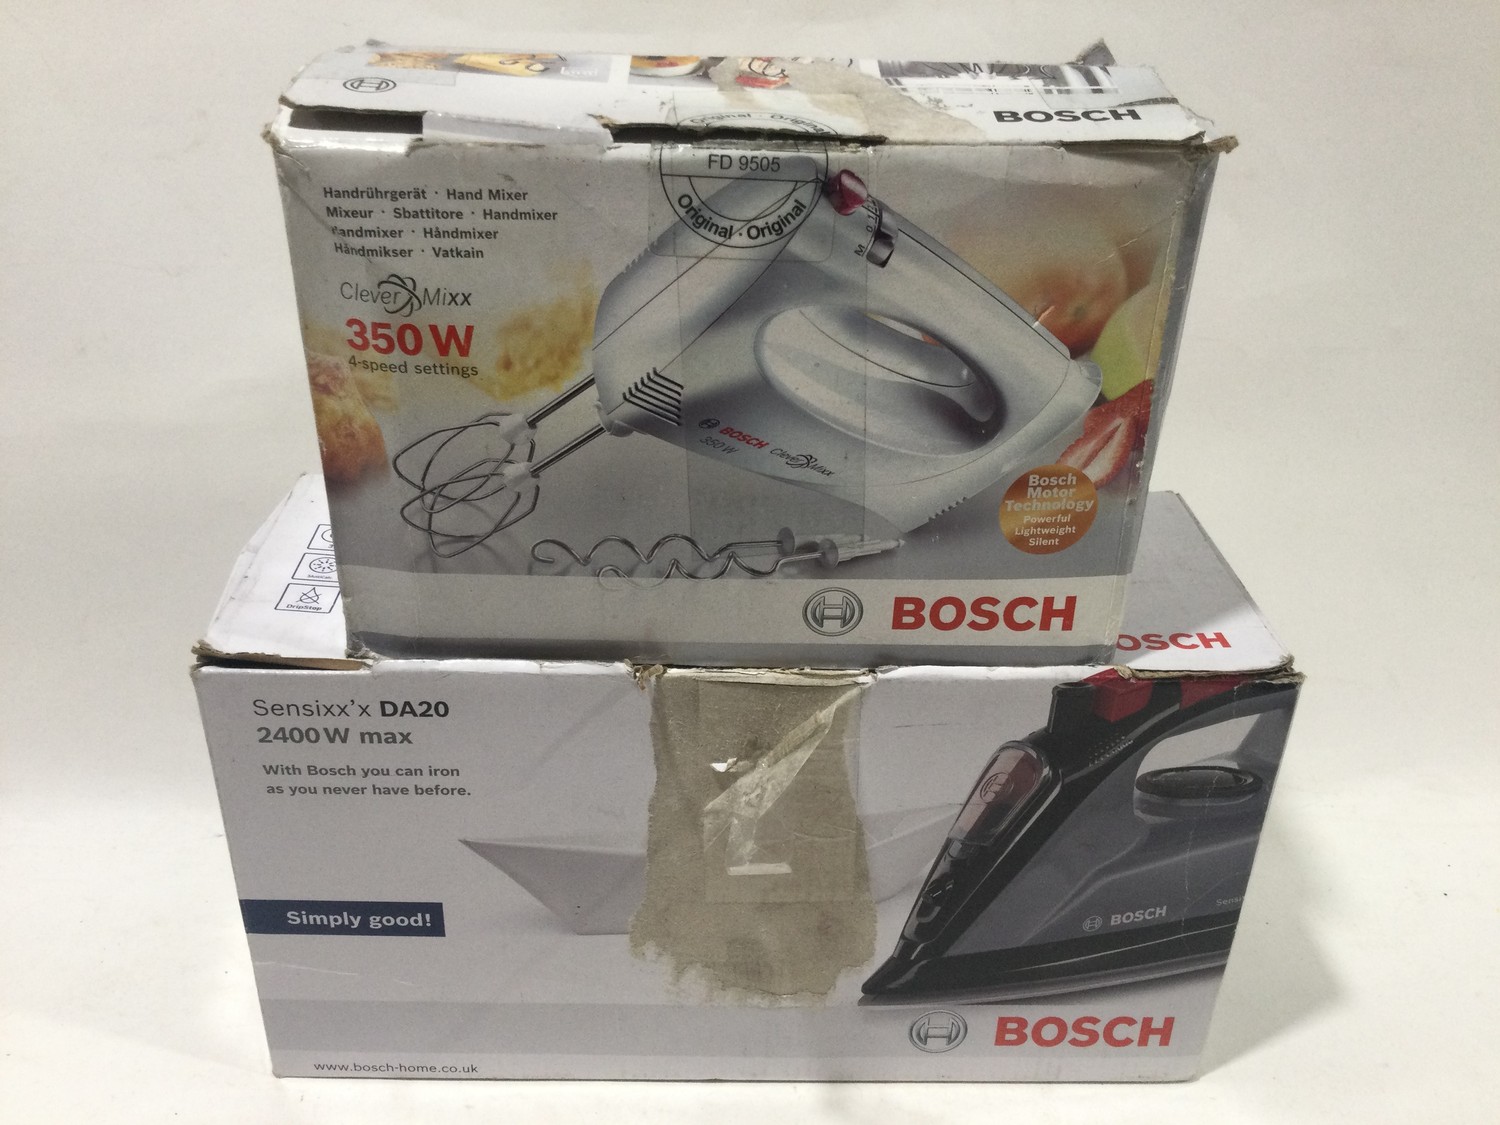 Shop display item Bosch DA20 iron and Bosch clever mixer boxed (2) untested